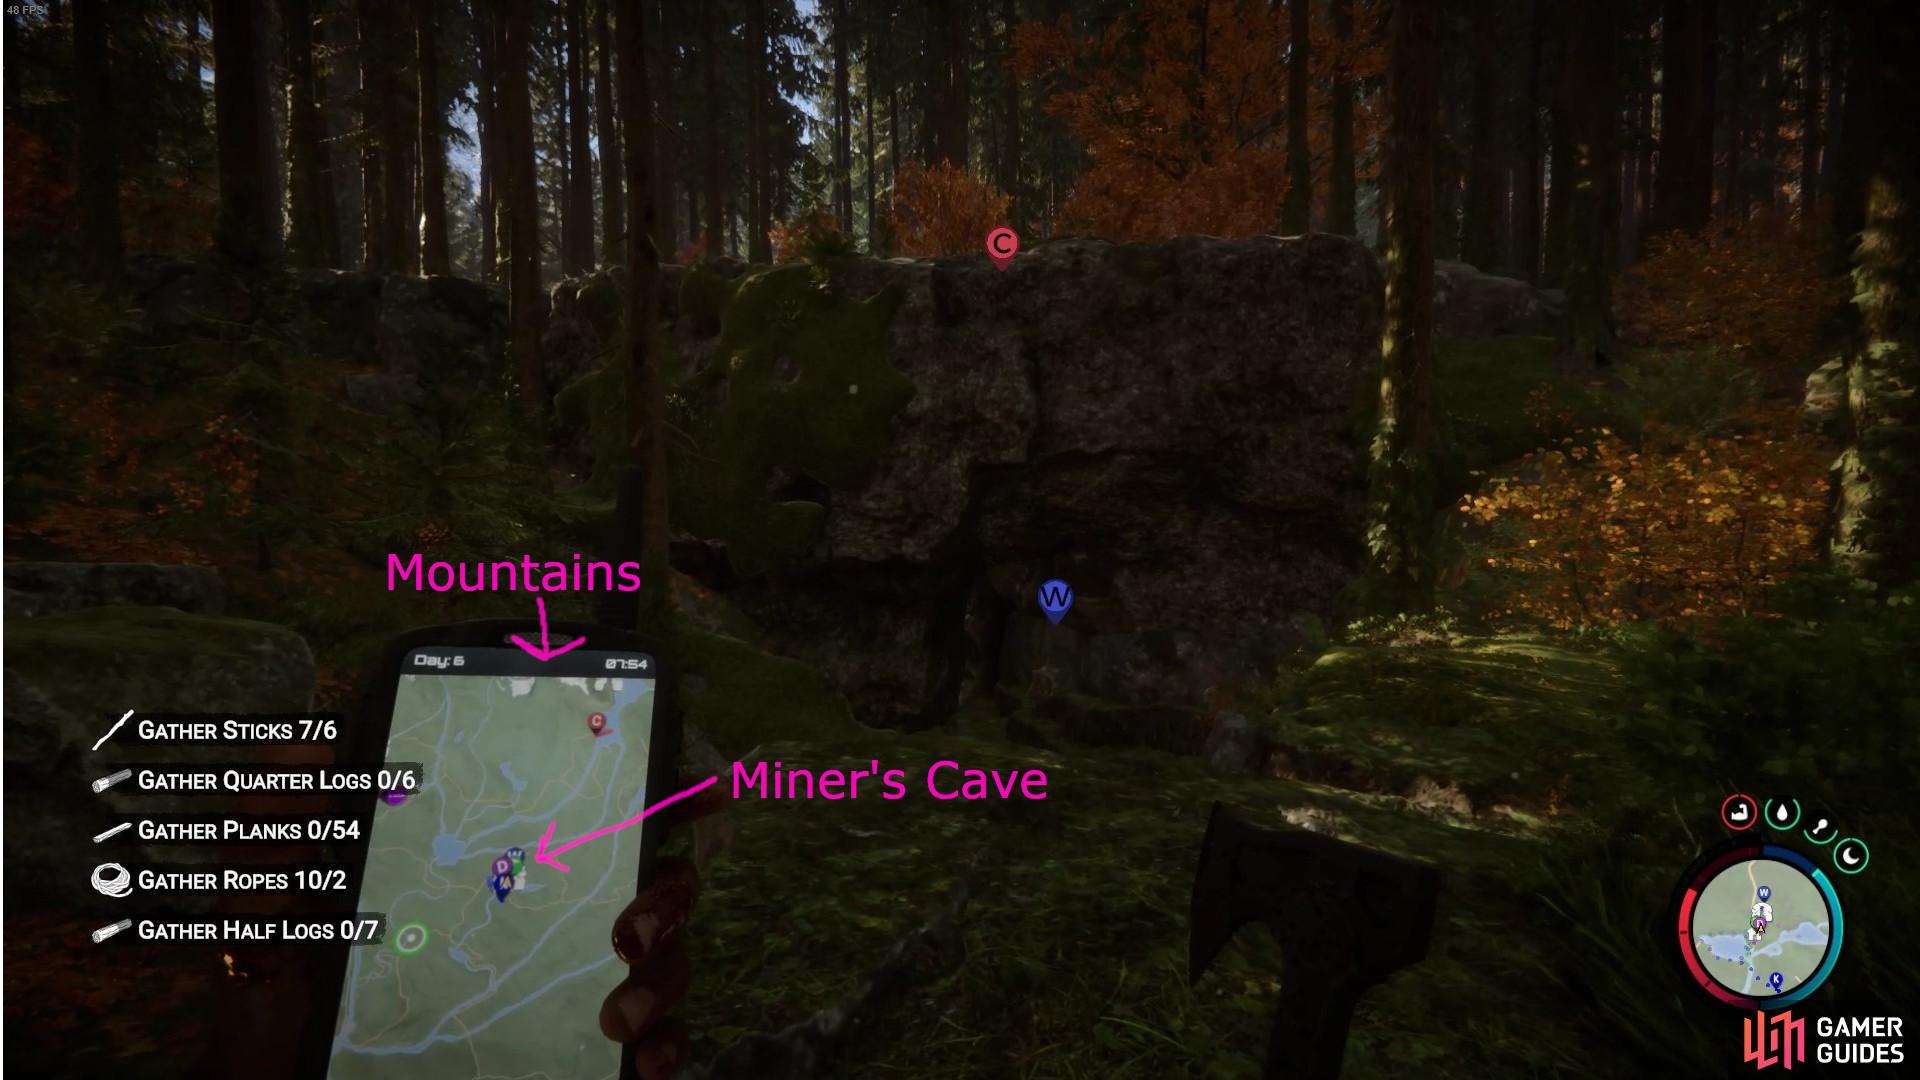 Sons Of The Forest New Cave Location